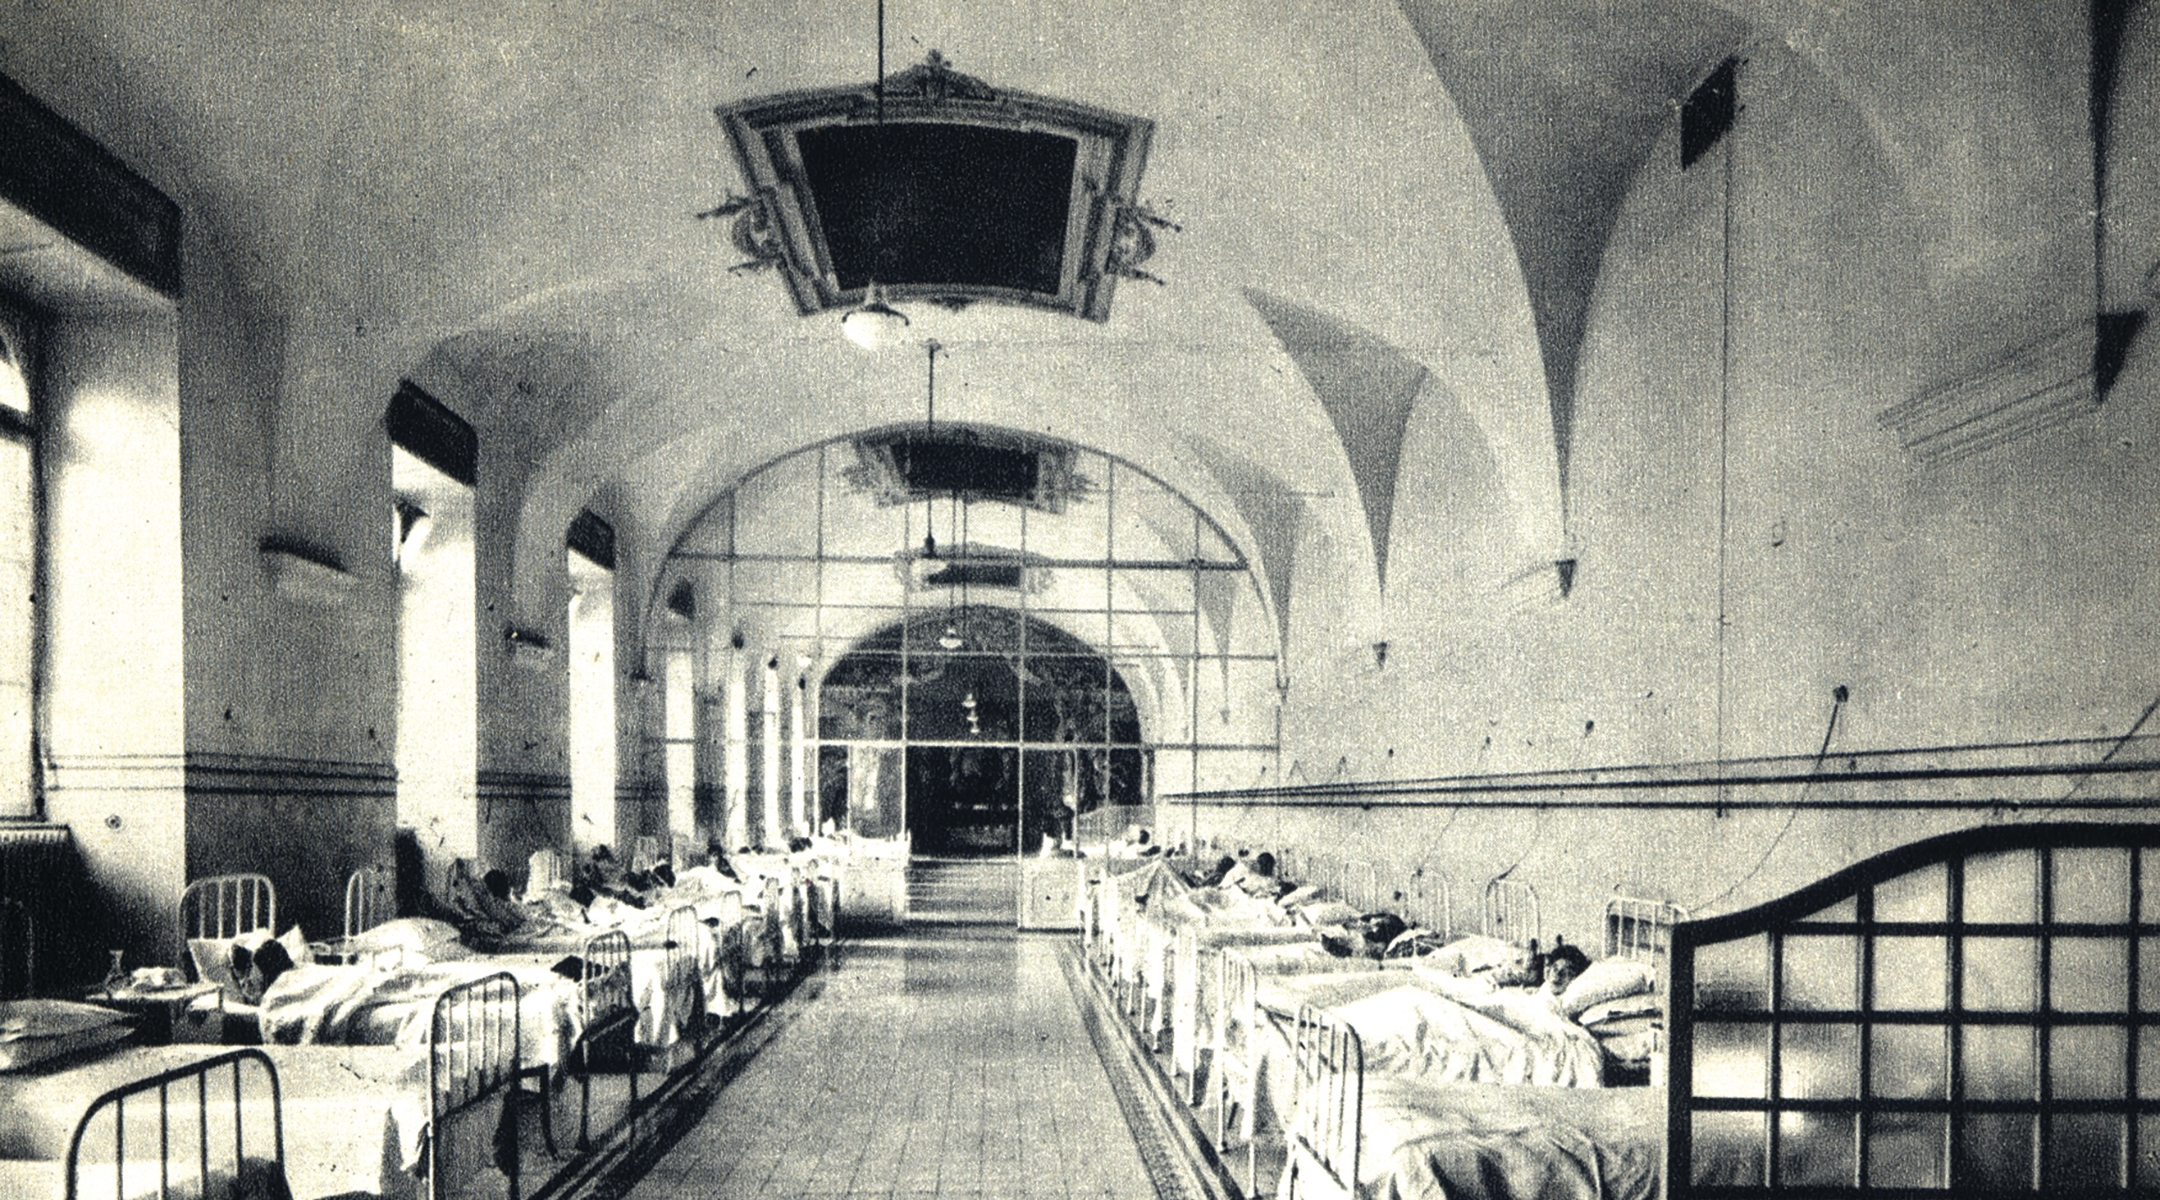 Patients laying in beds.